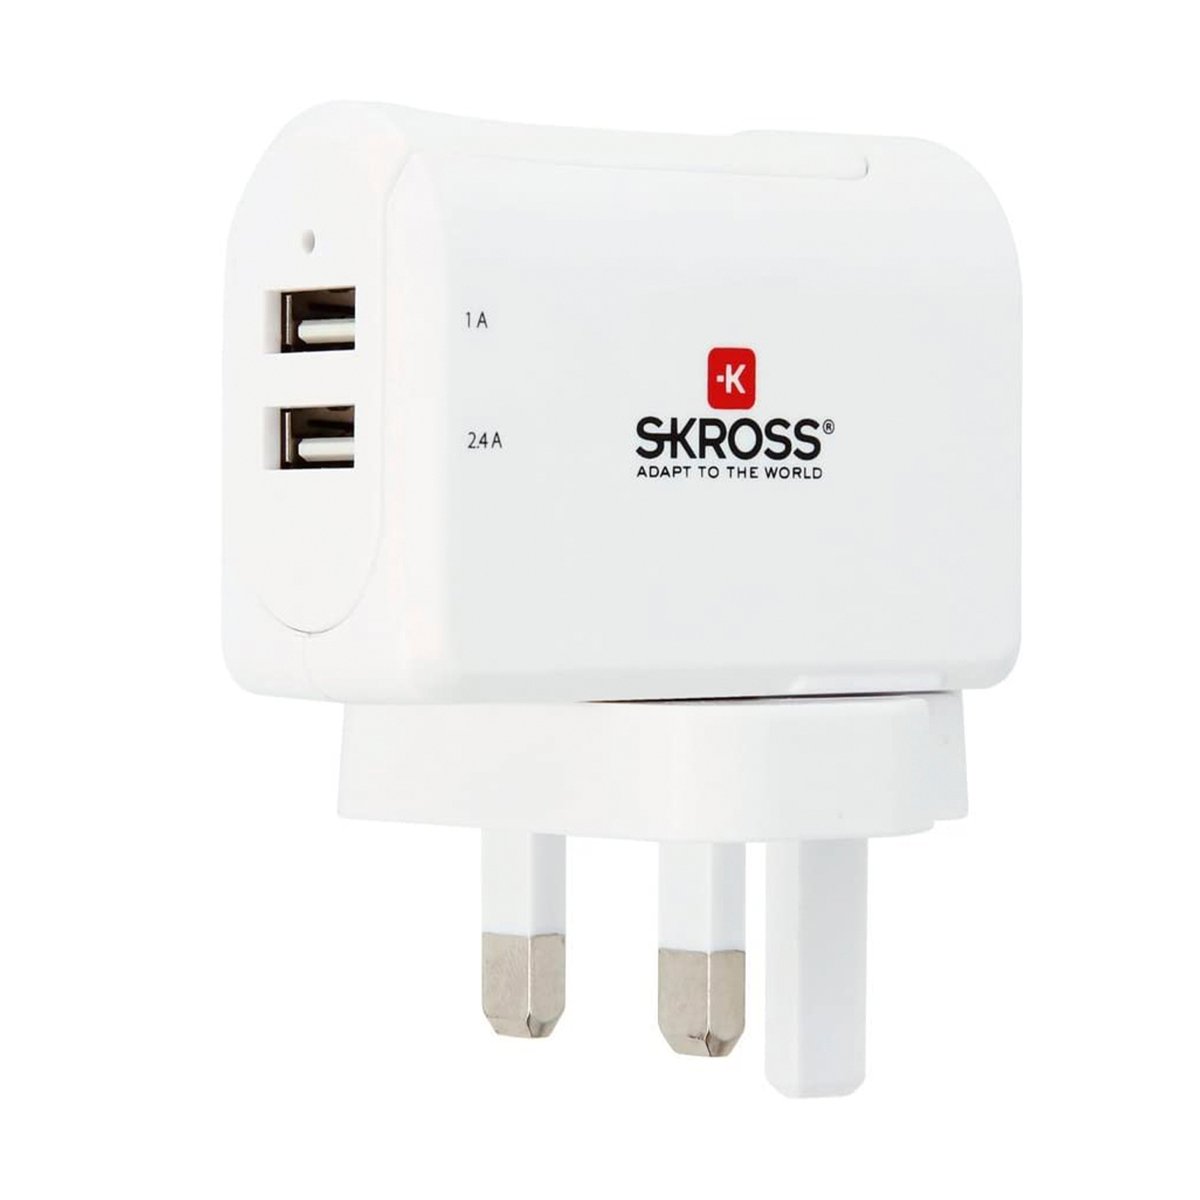 Skross UK USB Travel Charger, USB Charger with Dual USB Ports for Simultaneous Charging 2800112